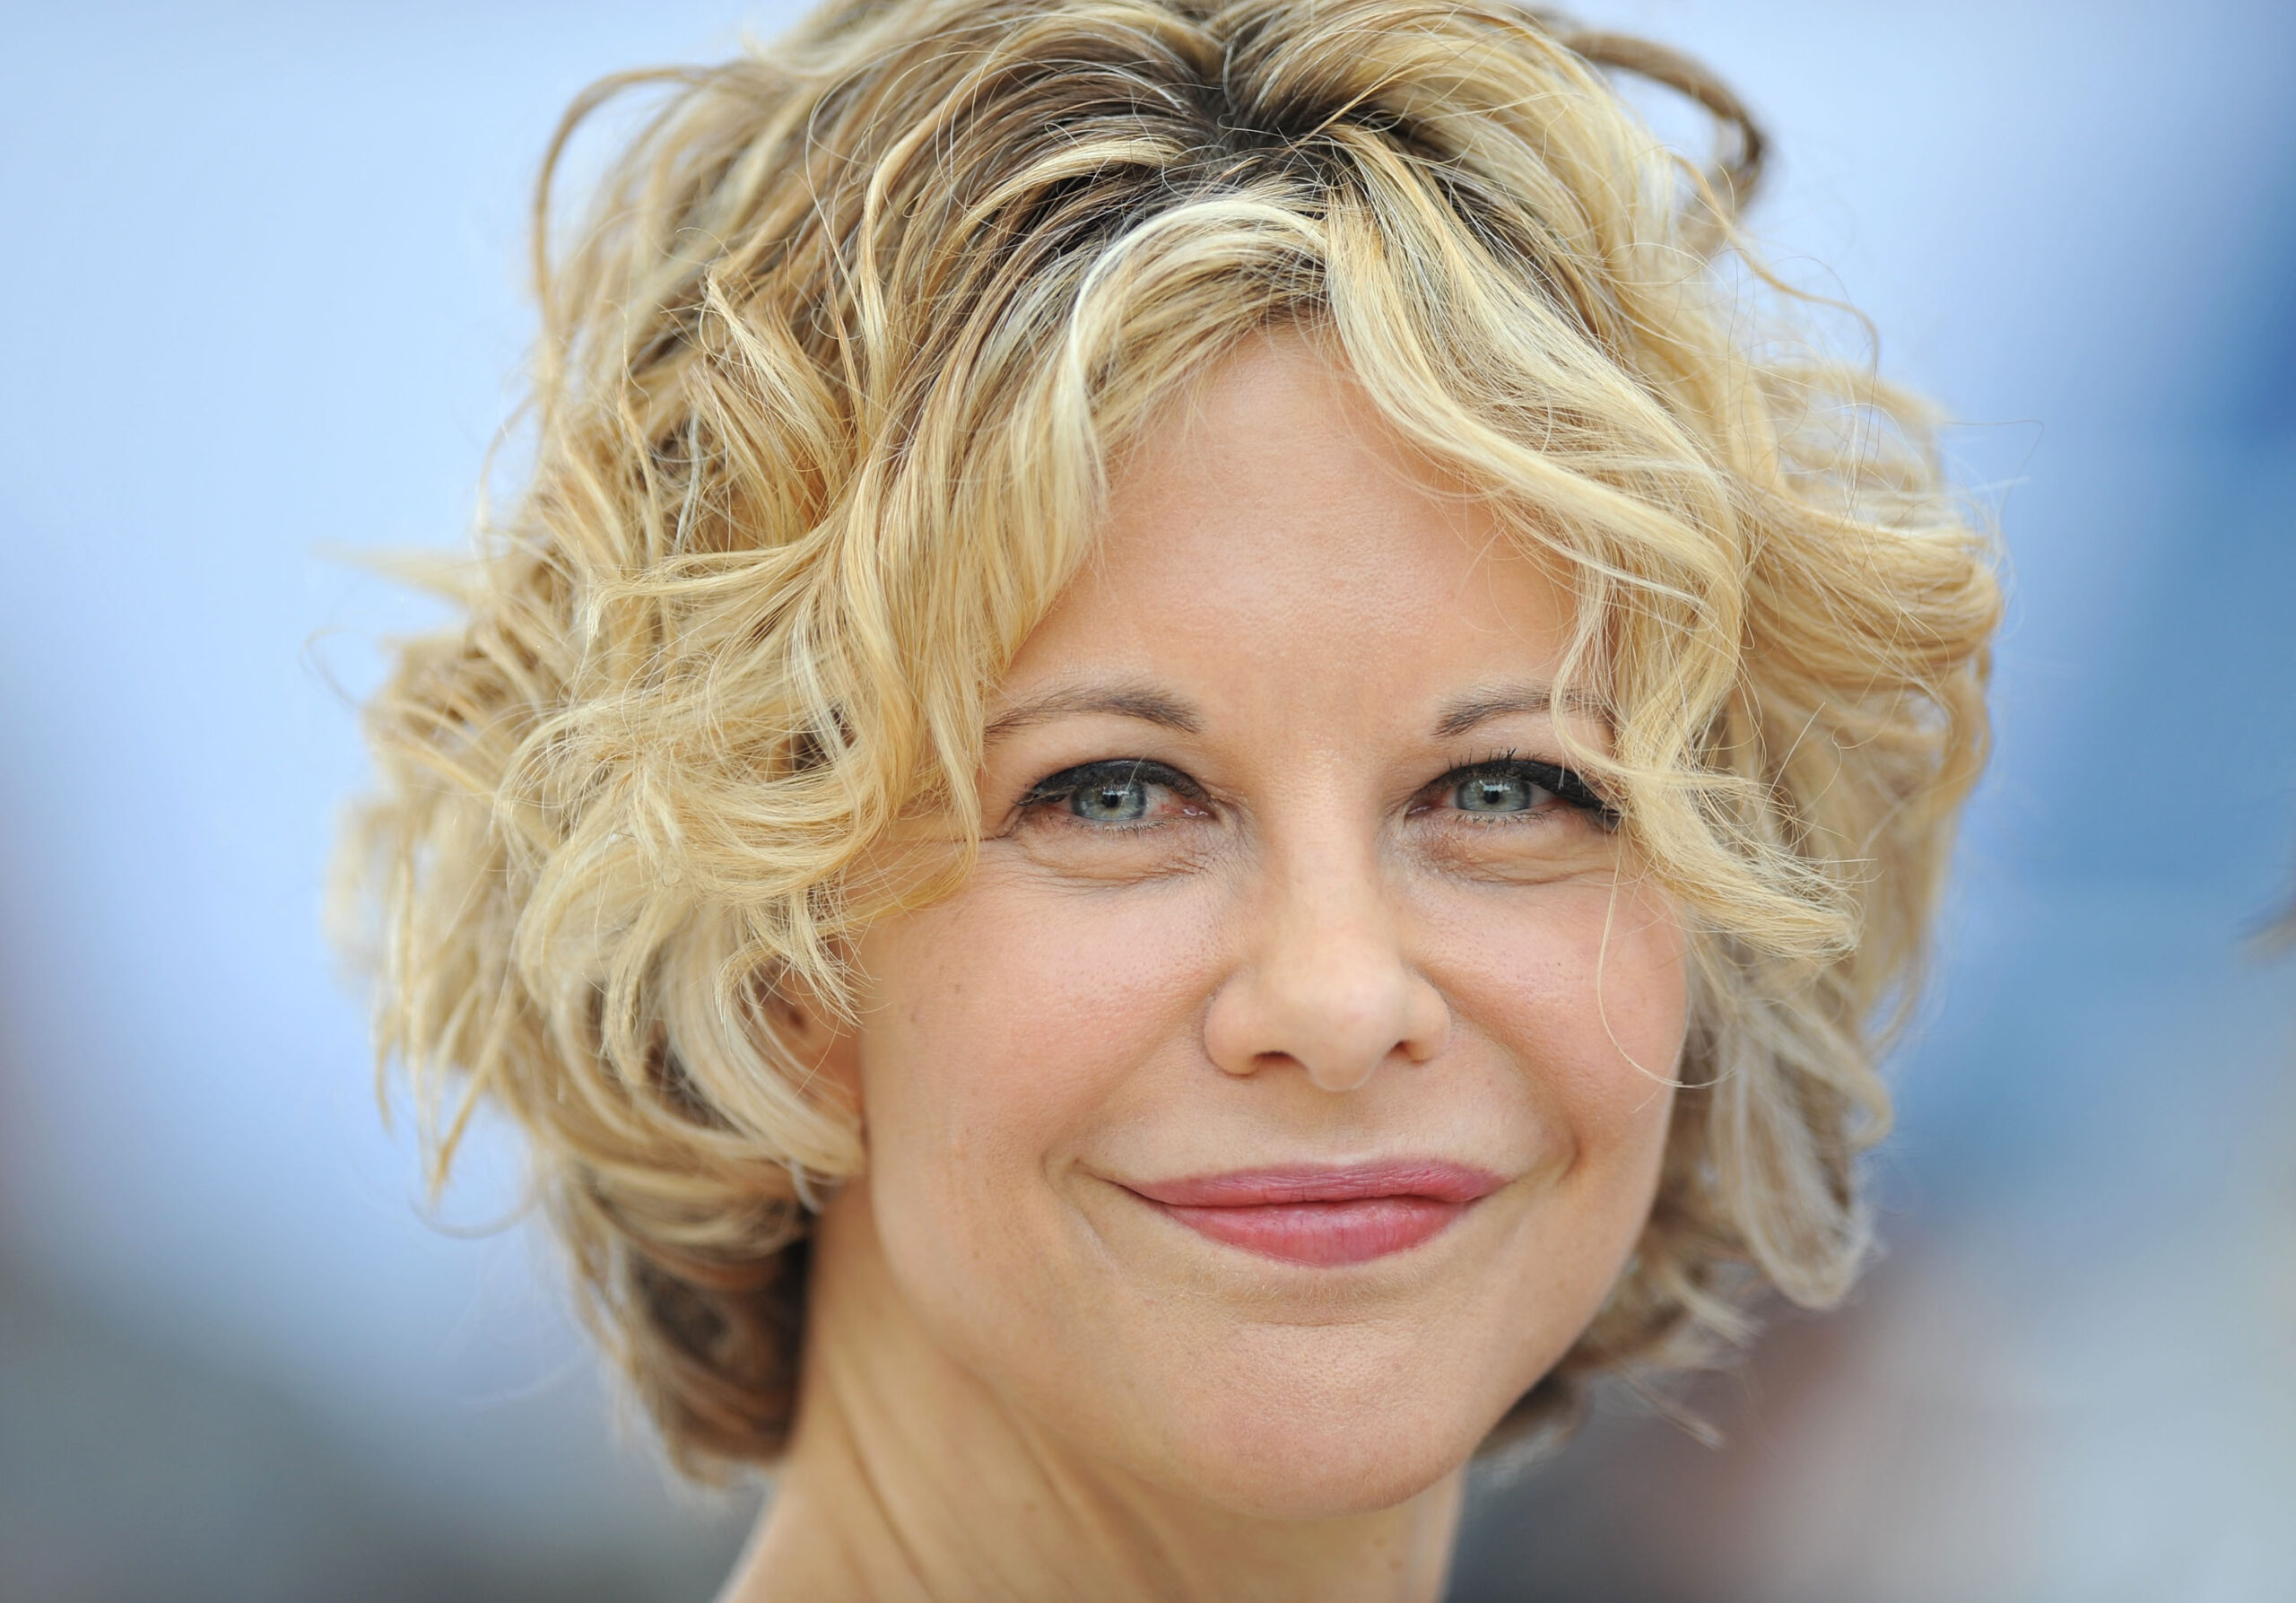 Meg Ryan, 61, is unrecognizable as she makes her first public appearance in six months.